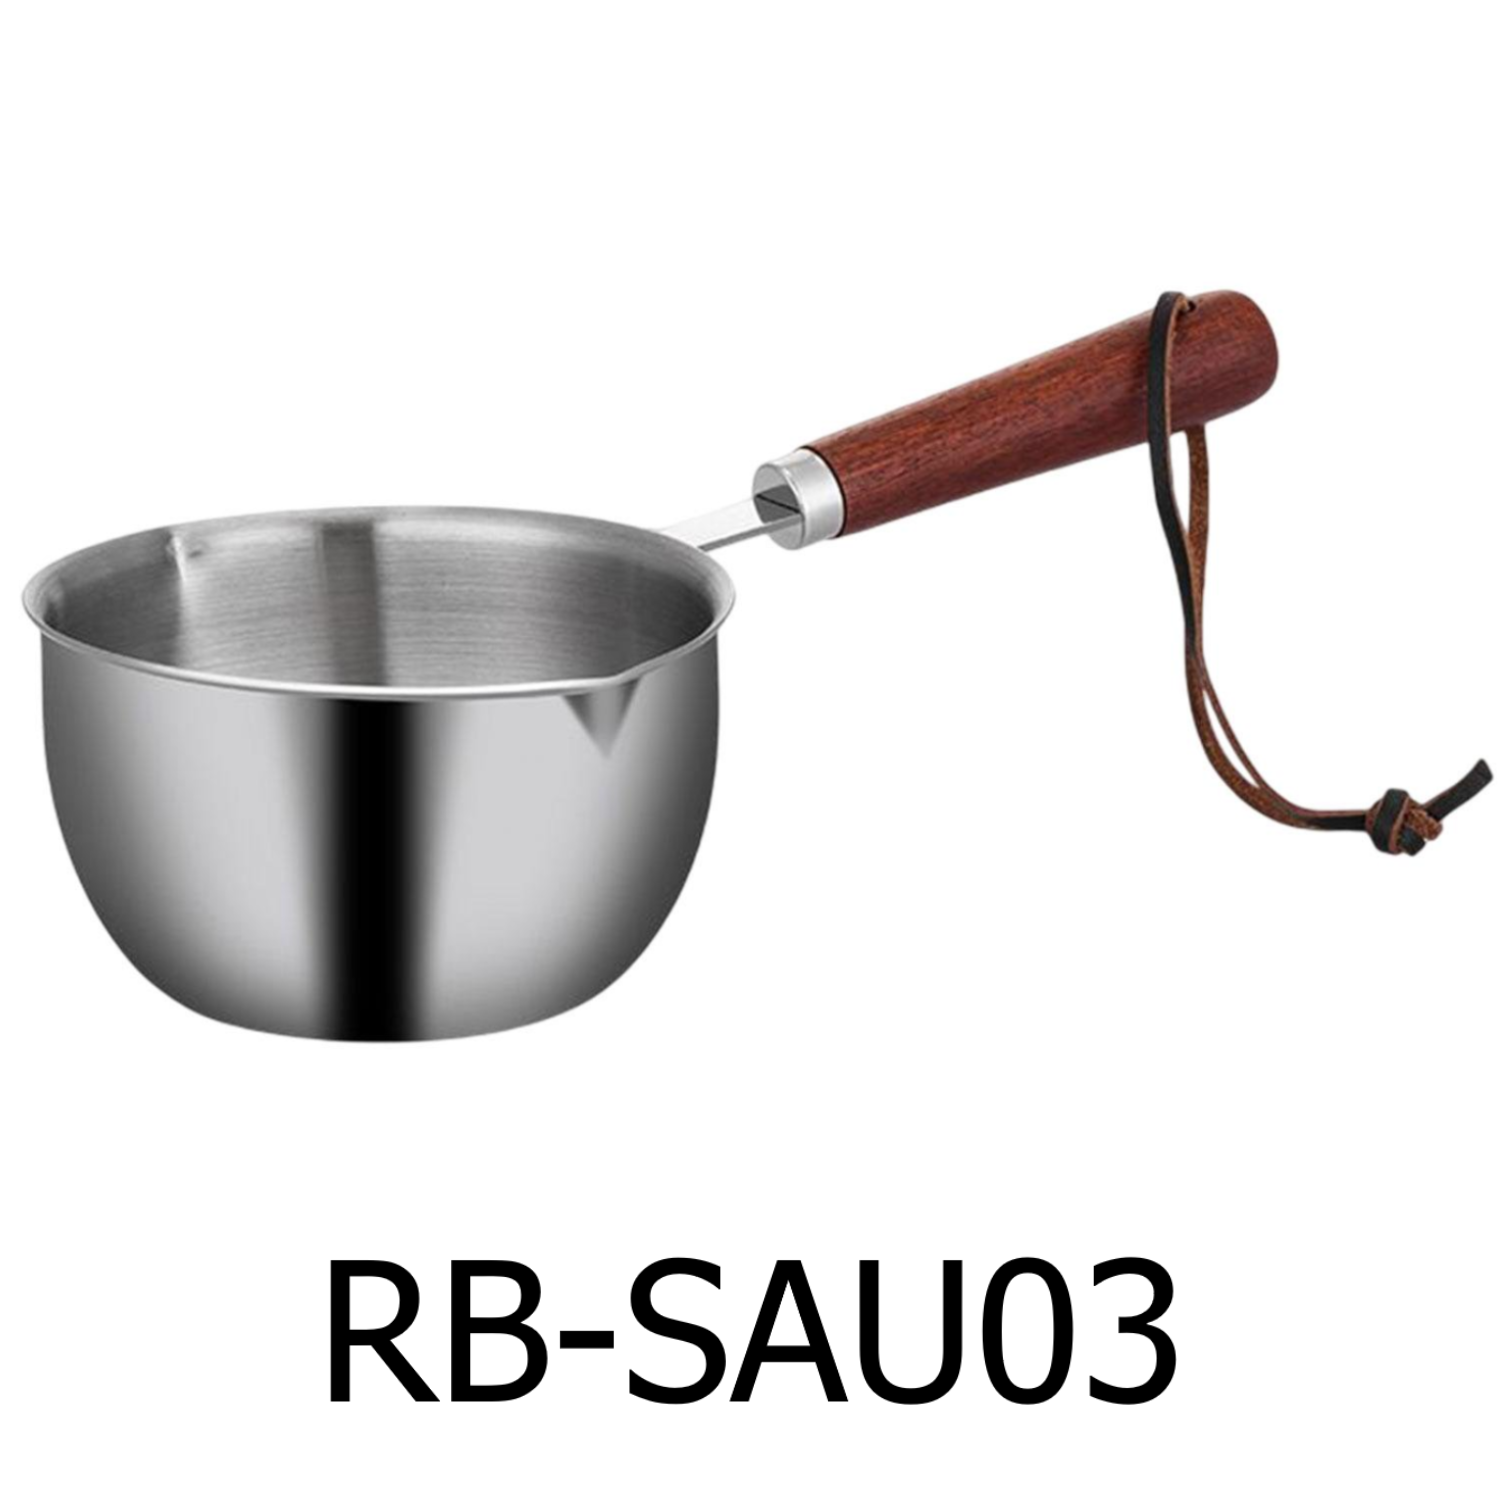 Stainless Steel Mini Sauce Pan With Lid